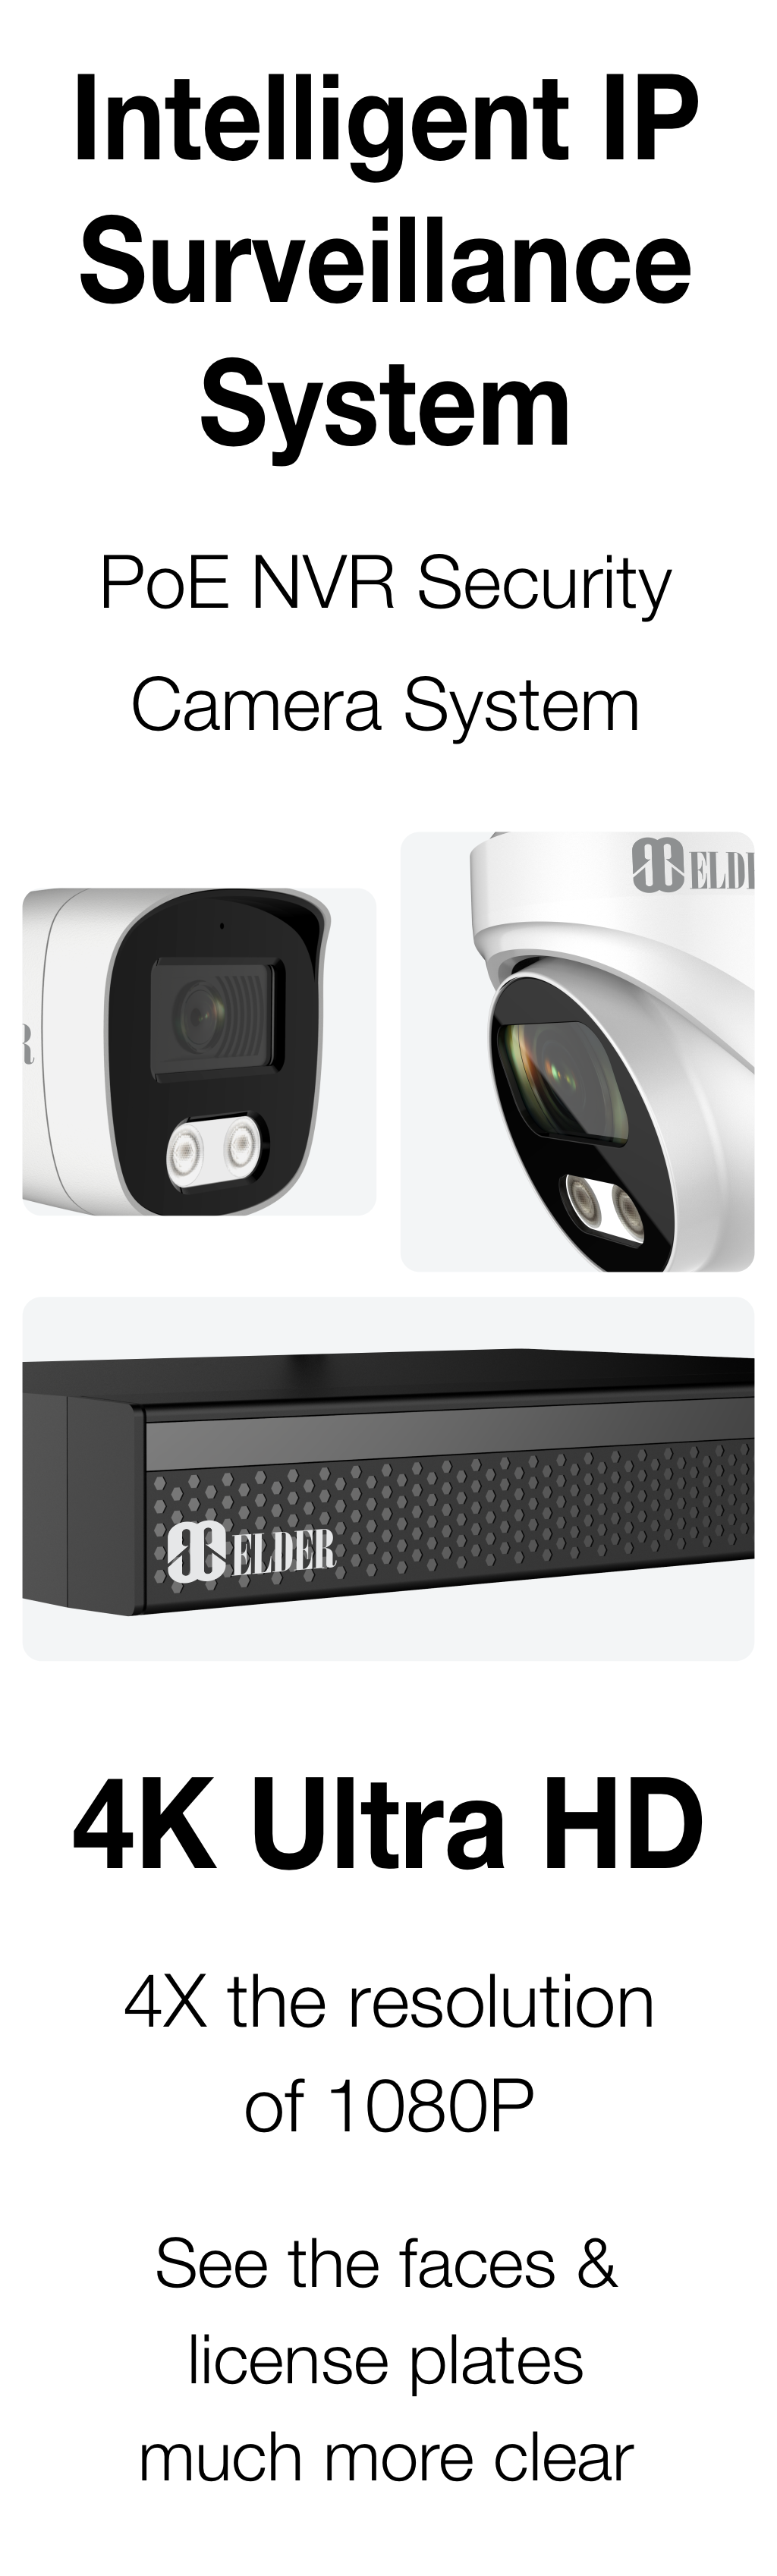 Elder 4K security camera system 8MP and 8-channel NVR surveillance system. It's 4x the resolution of 1080p.